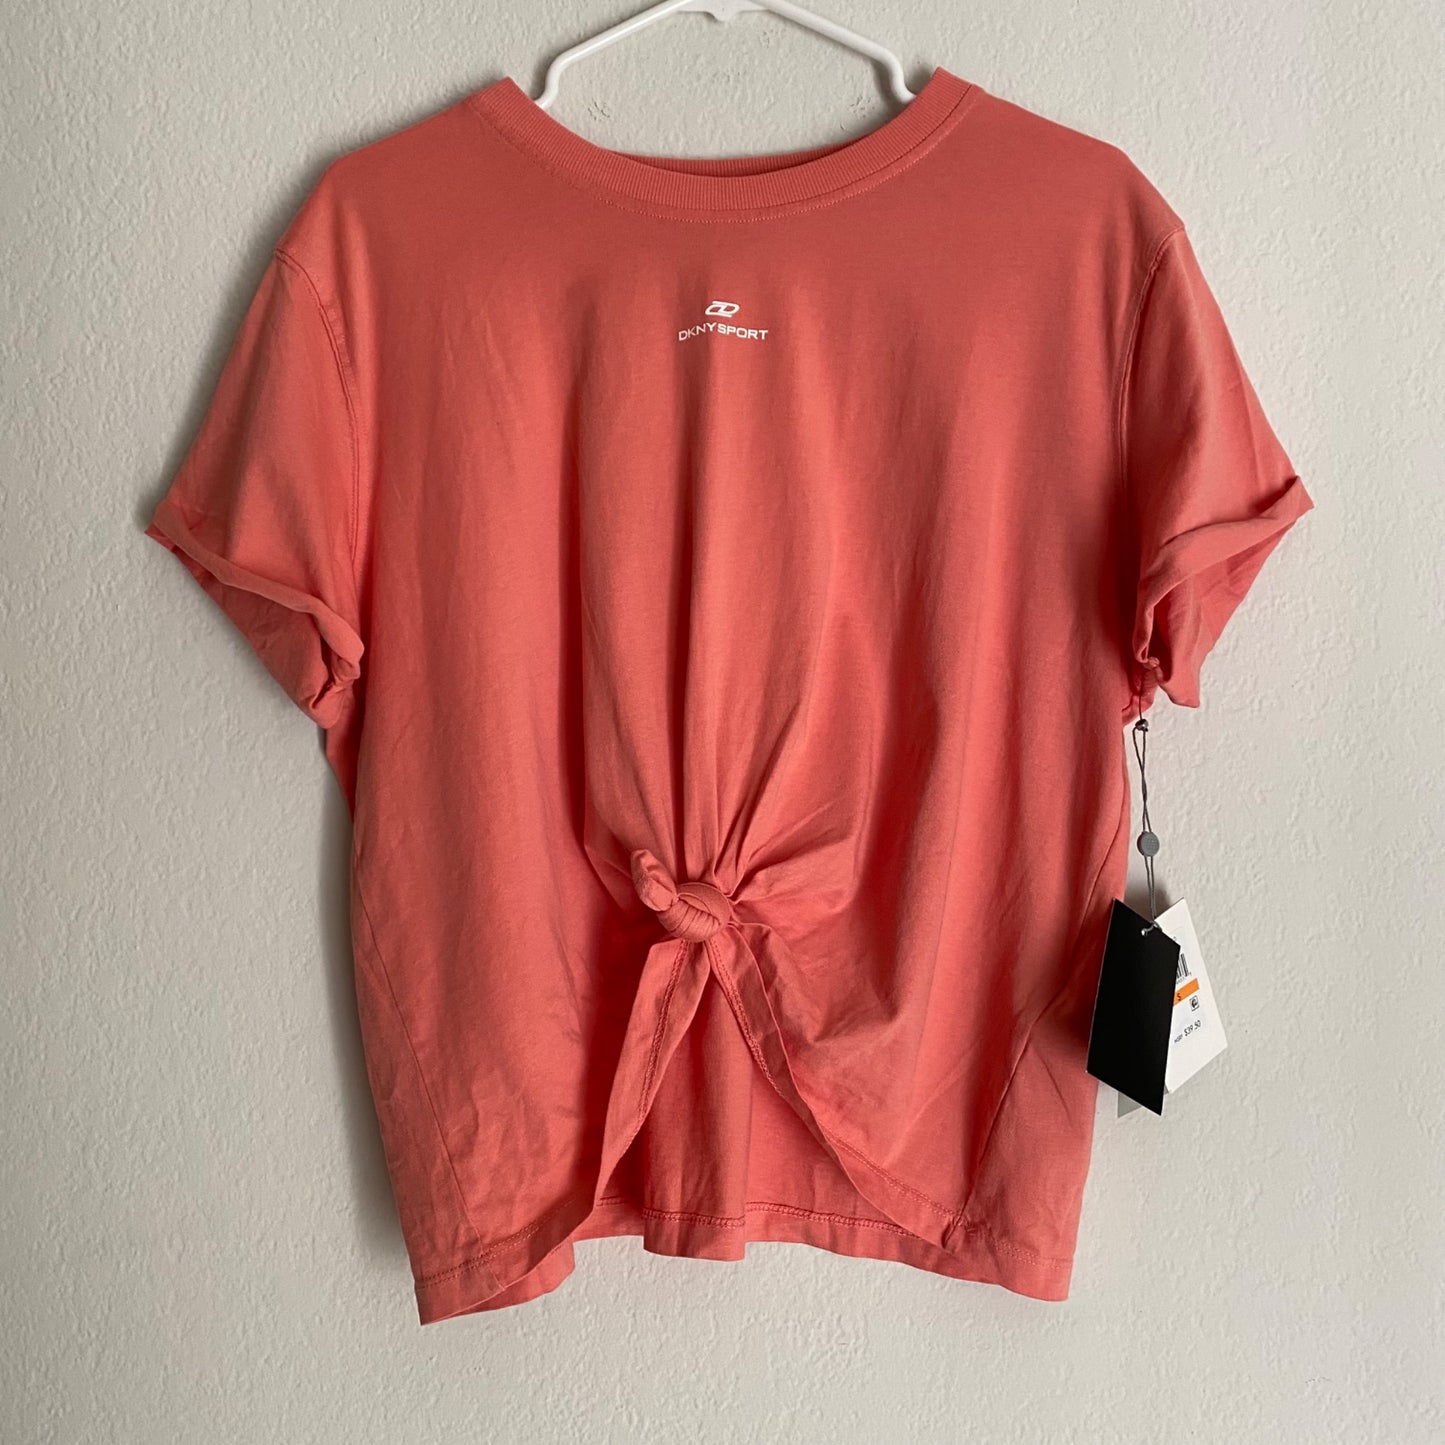 DKNY sz VARIOUS SIZES Pigment Dyed Sport Icon Logo Boxy Knotted Tee in coral